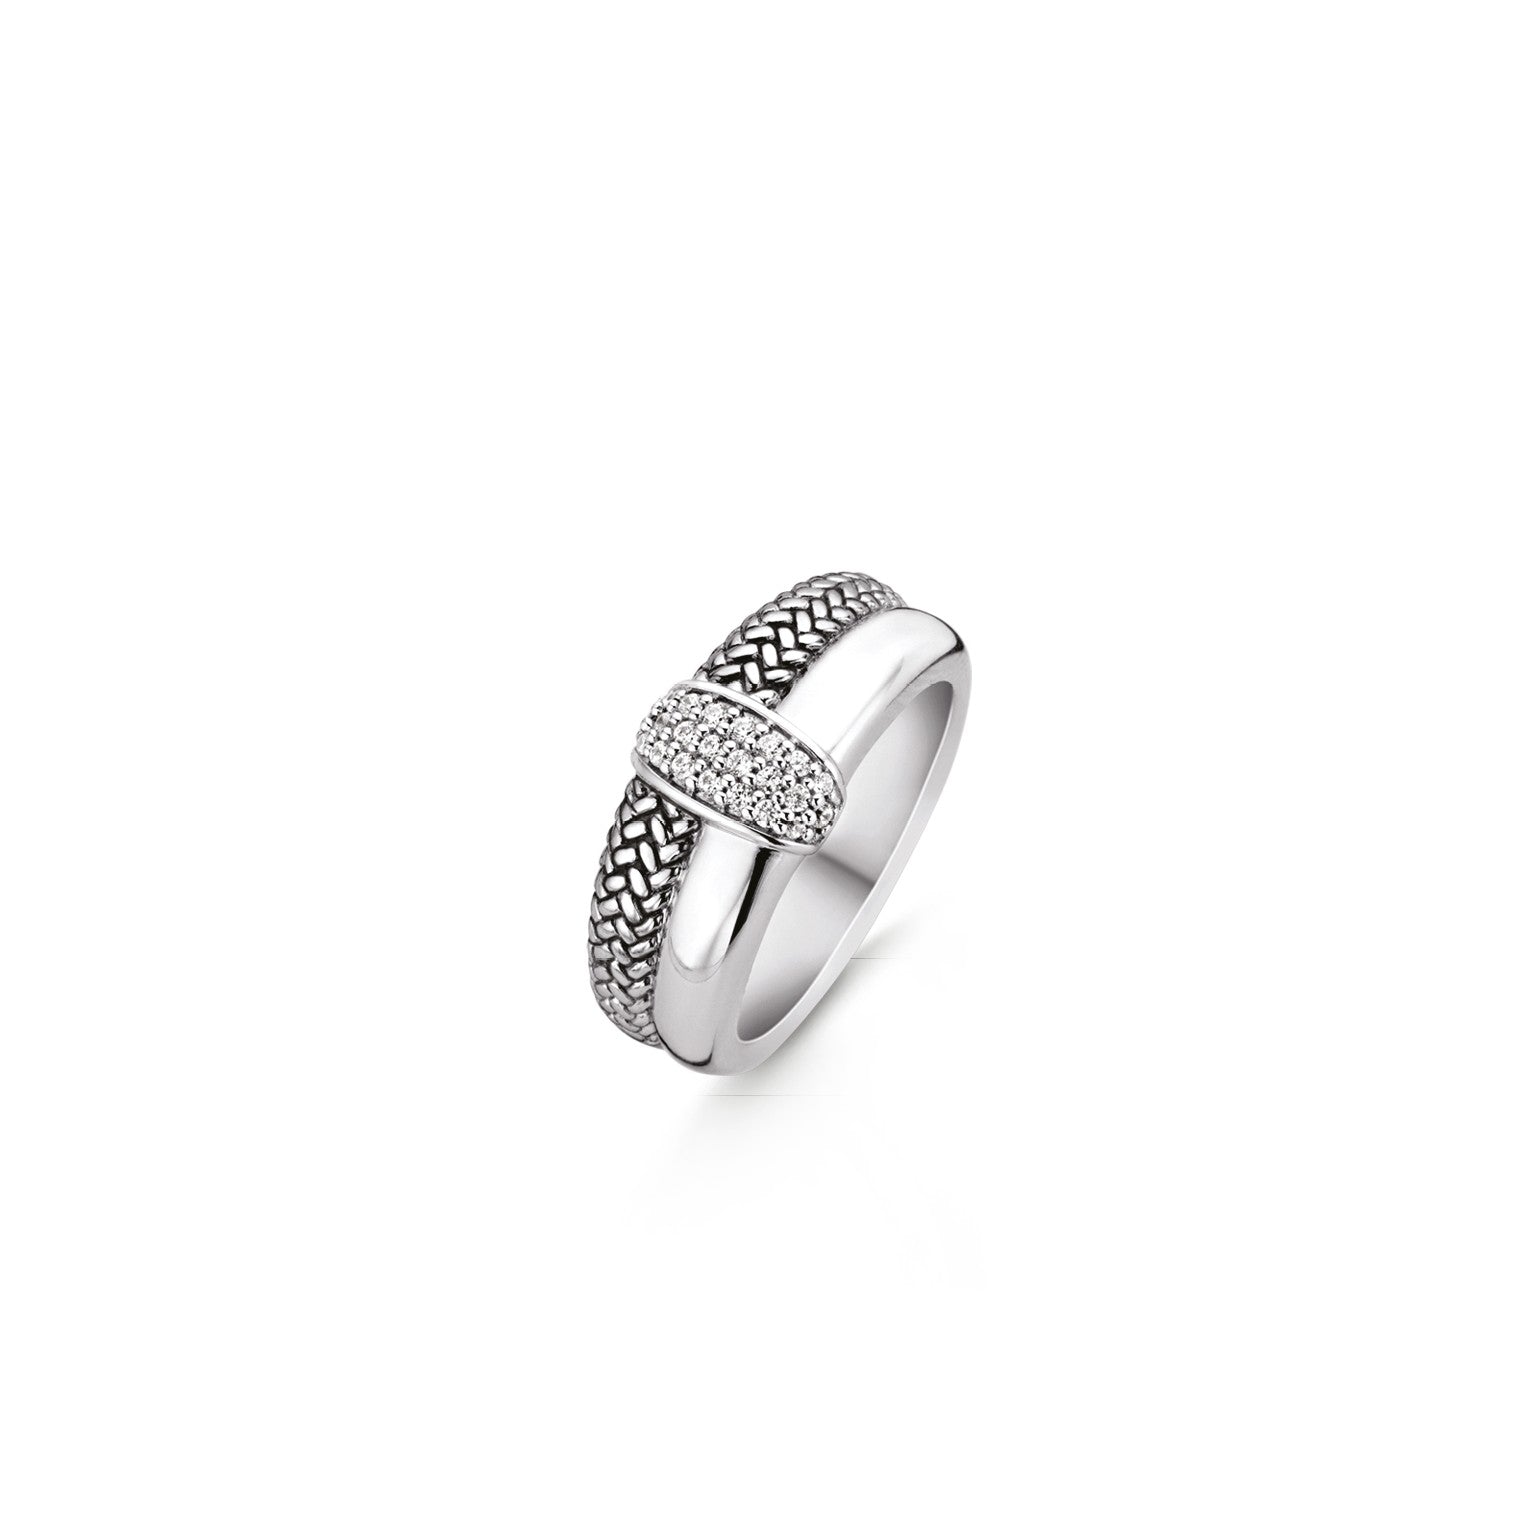 Double Braid Pave Ring